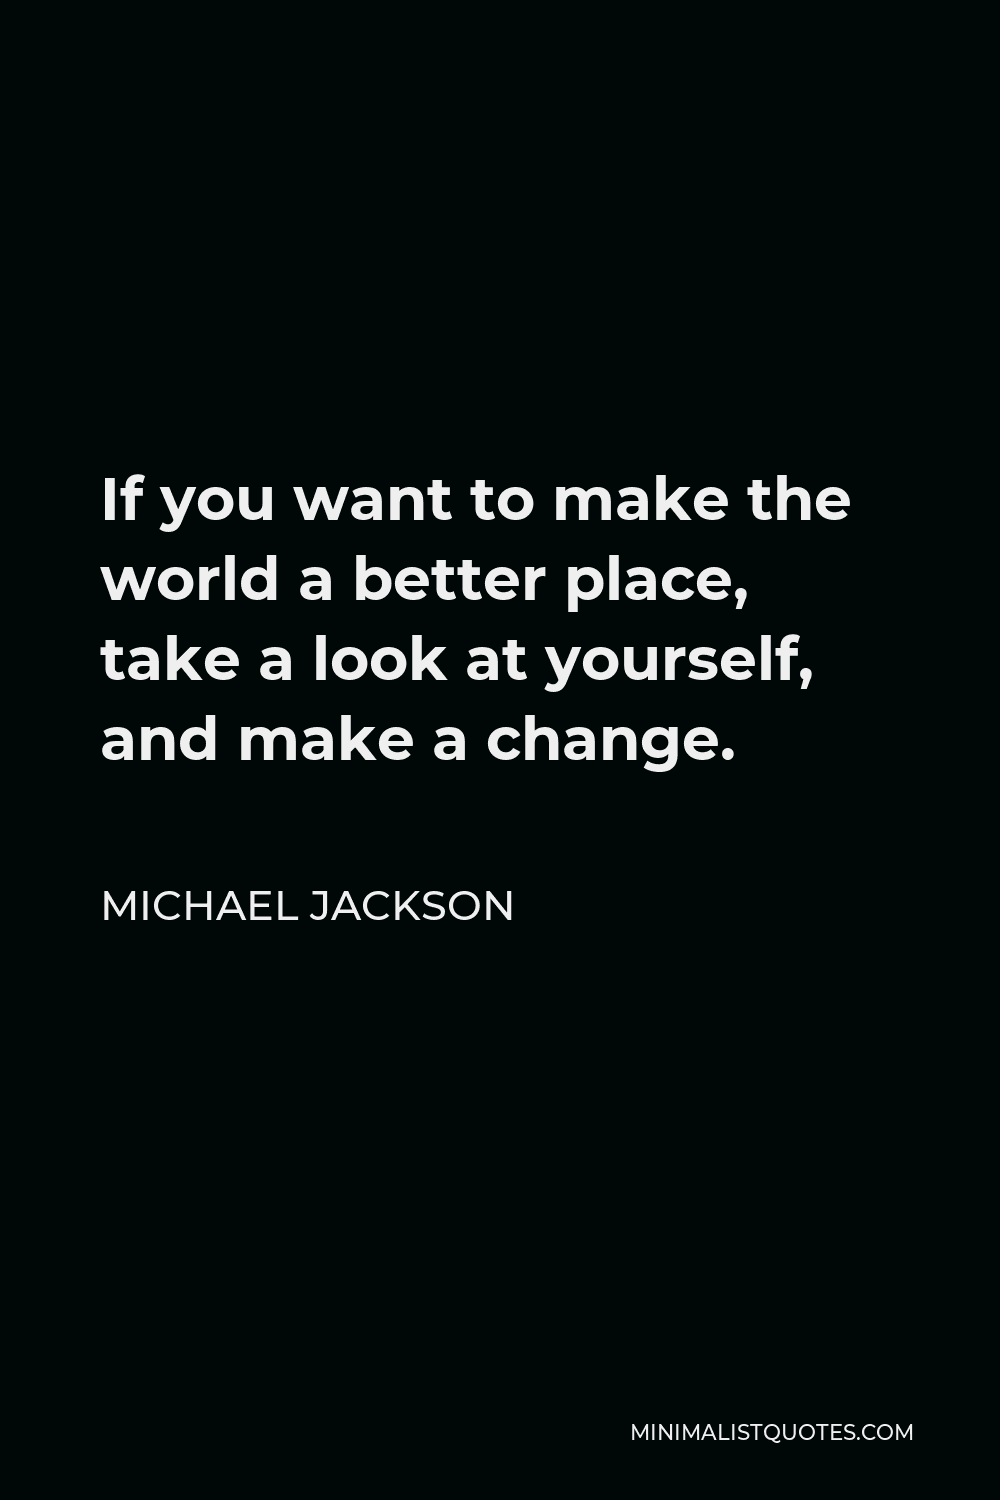 michael-jackson-quote-if-you-want-to-make-the-world-a-better-place